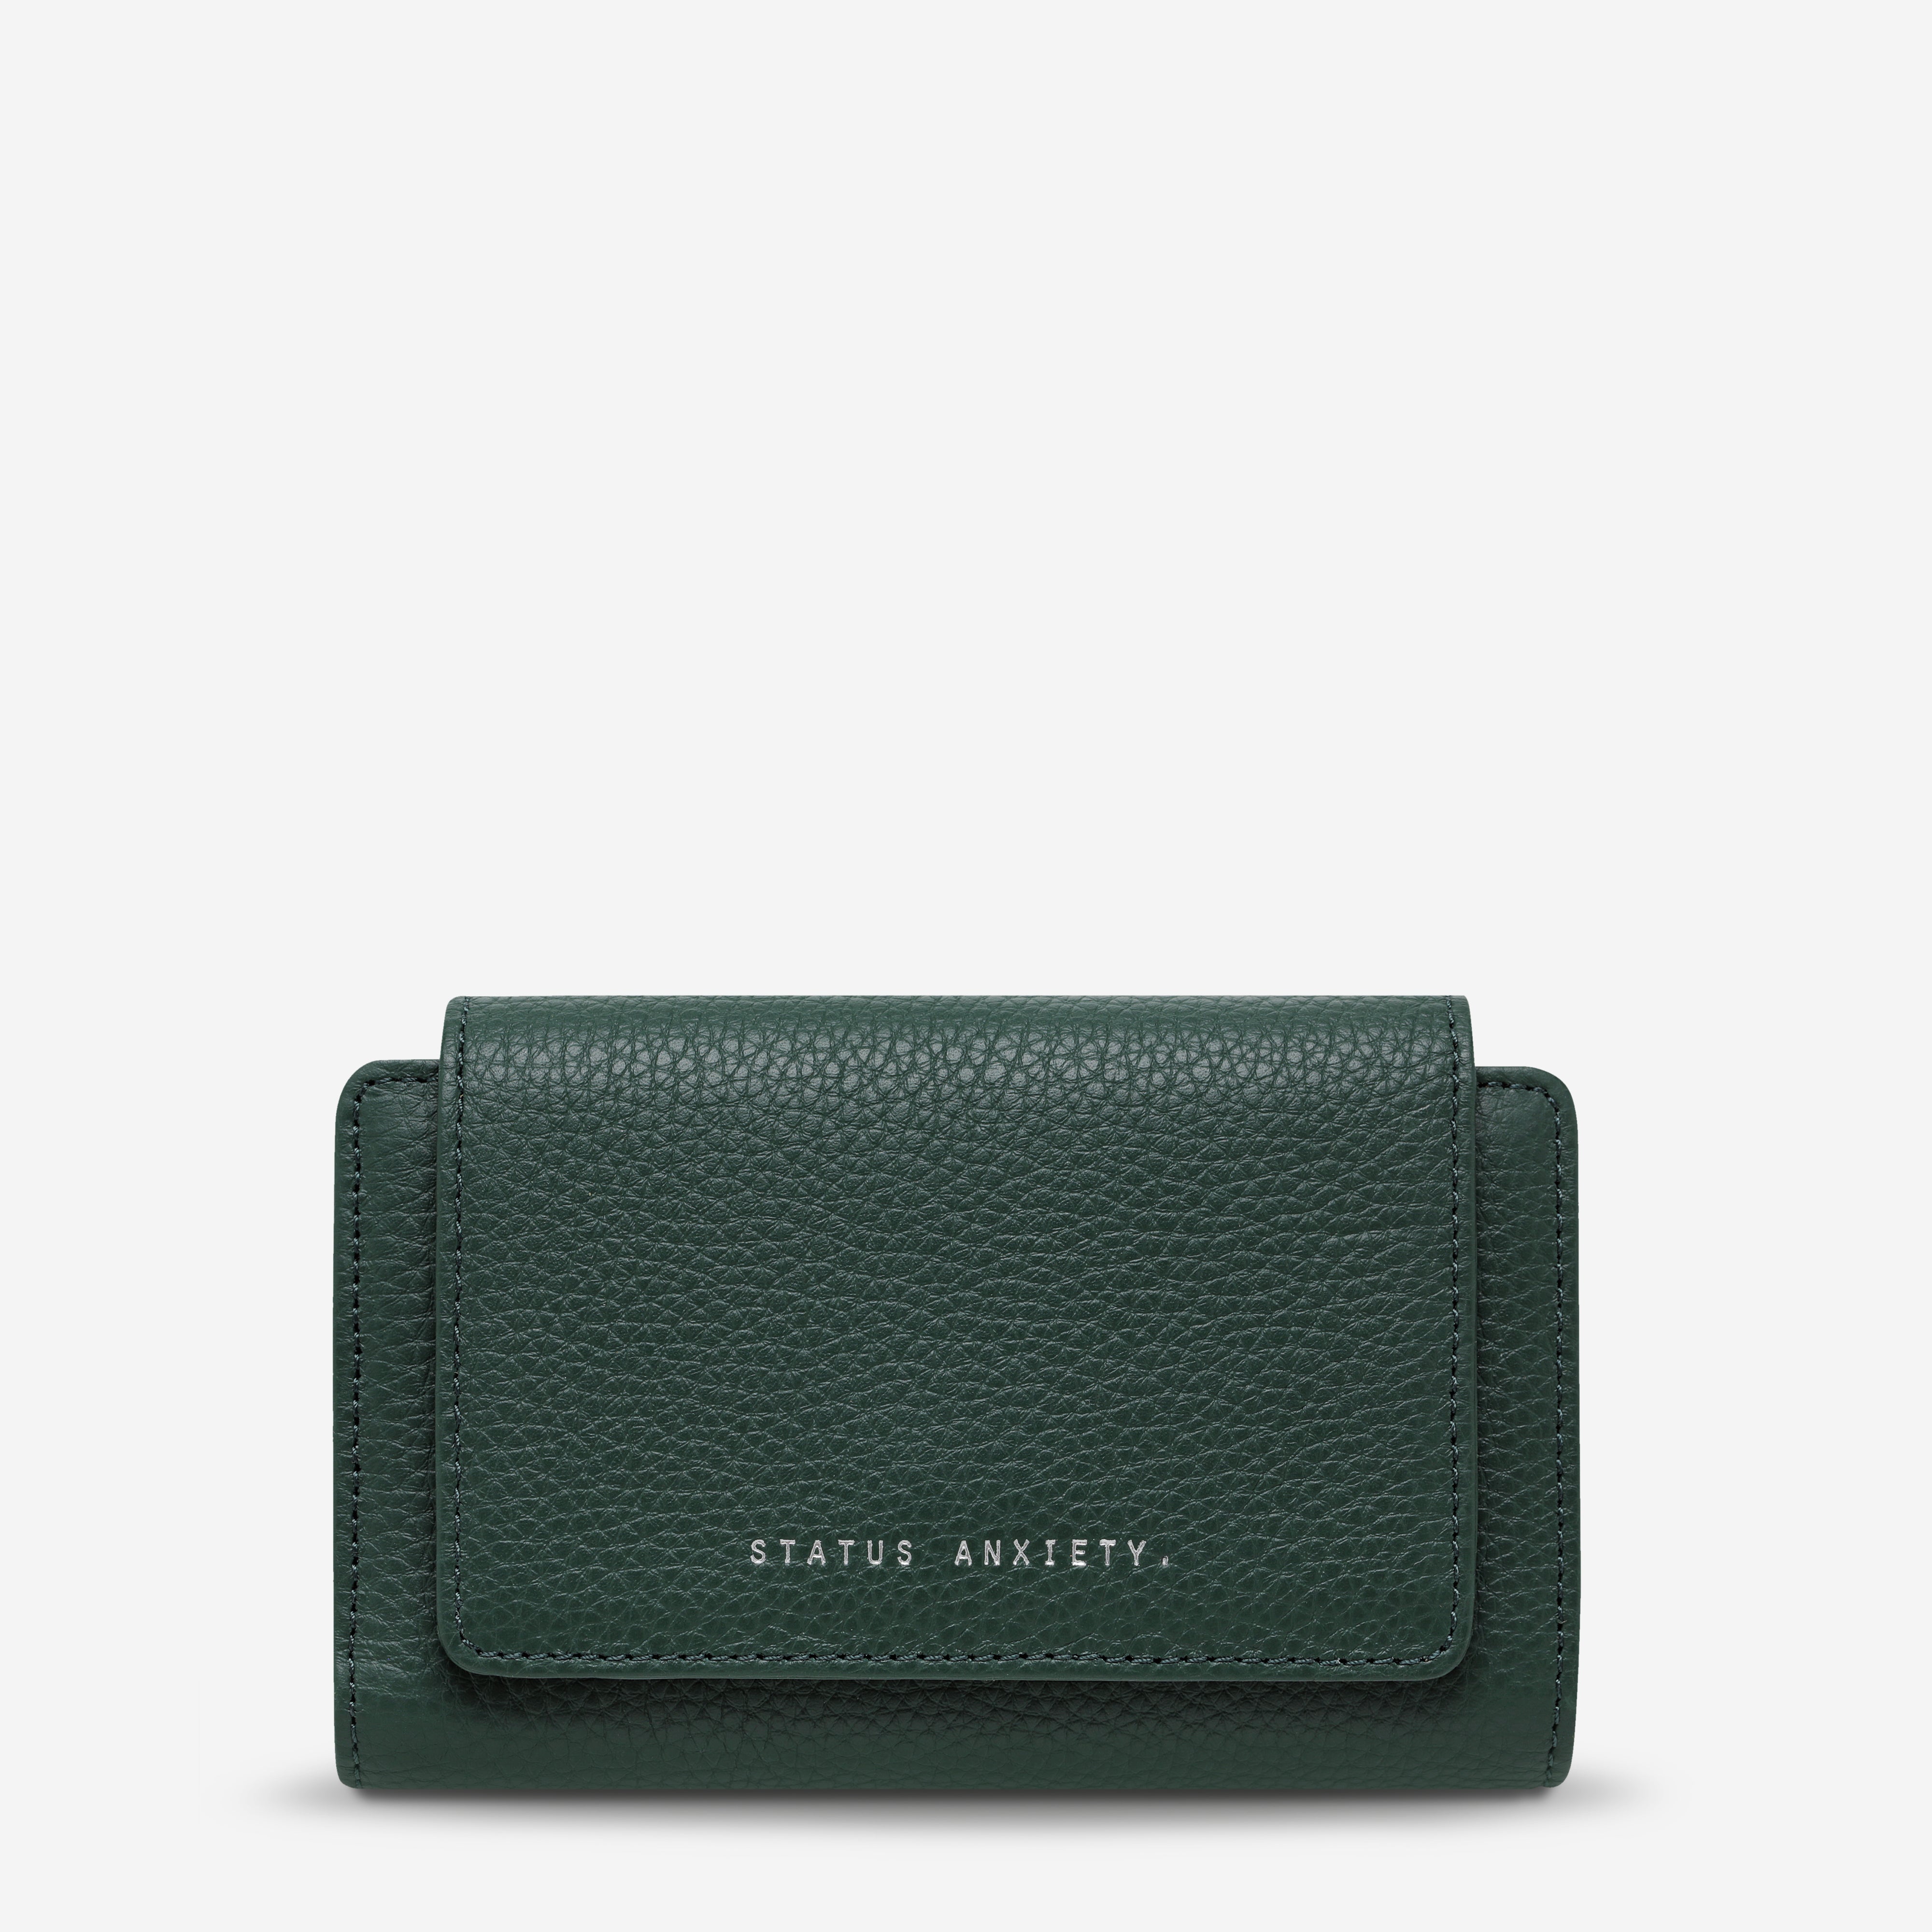 Status Anxiety Visions Women's Leather Wallet Teal